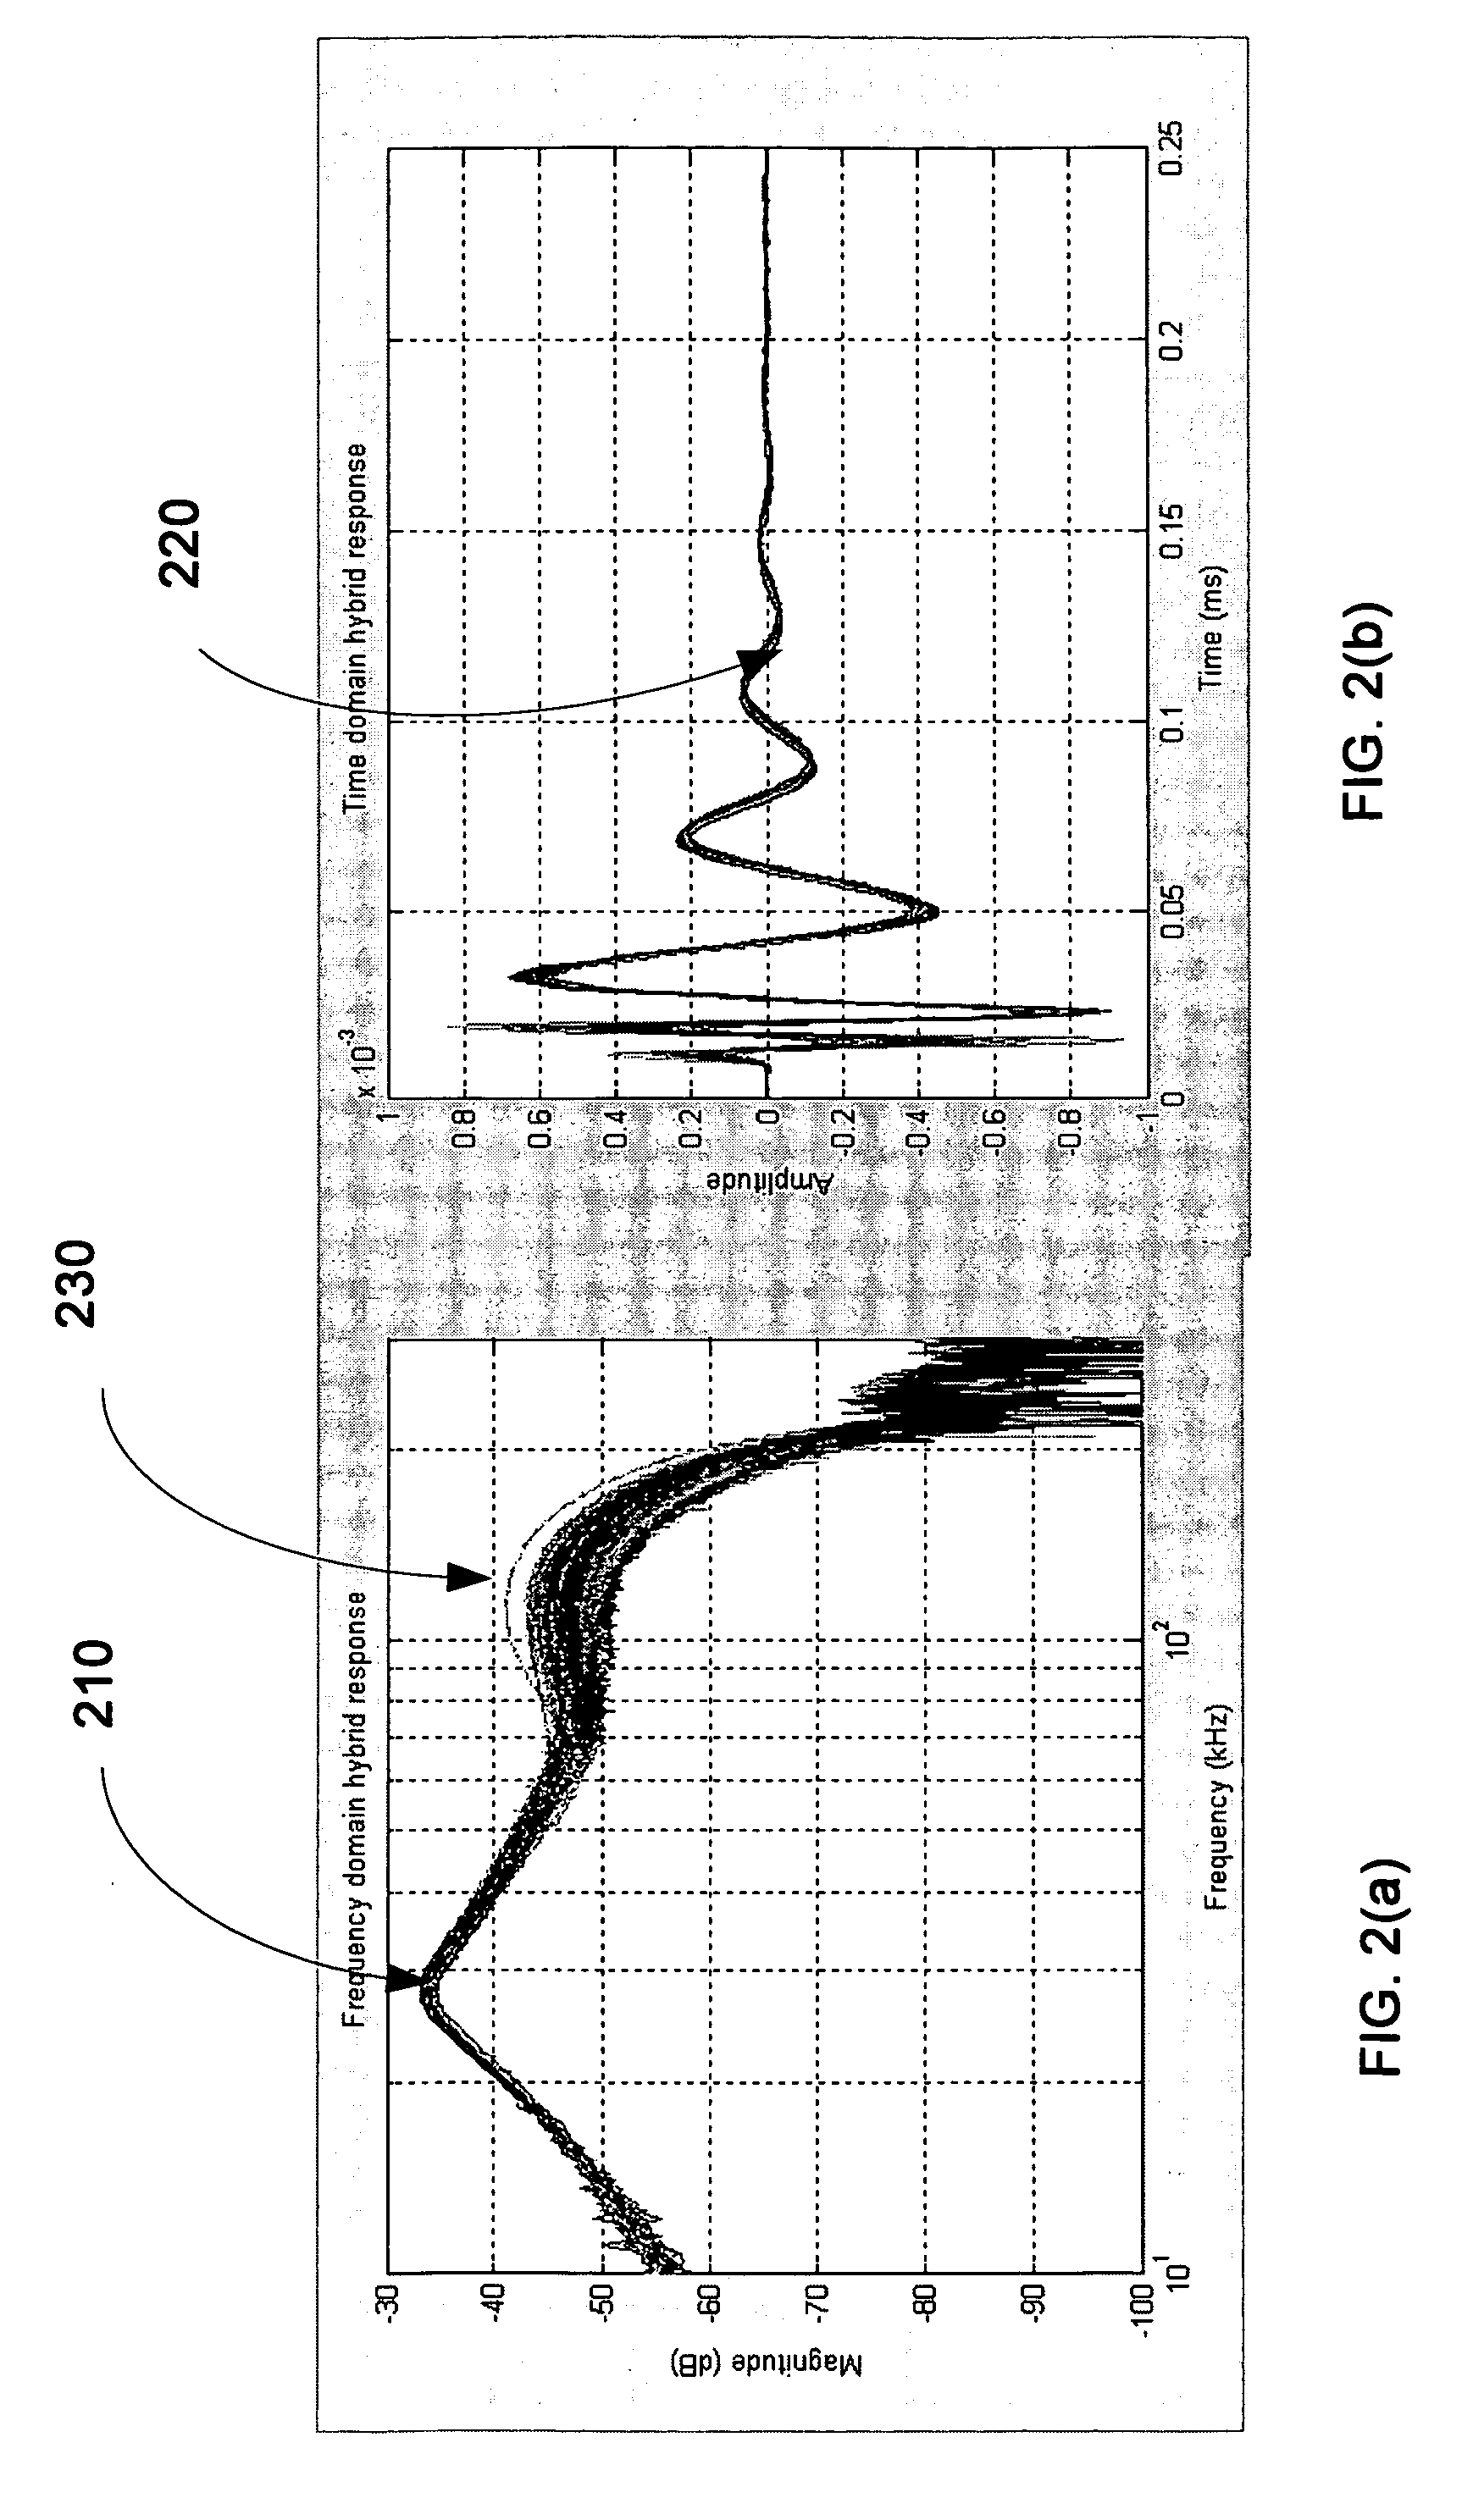 Method and apparatus for single end loop testing for DSL provisioning and maintenance